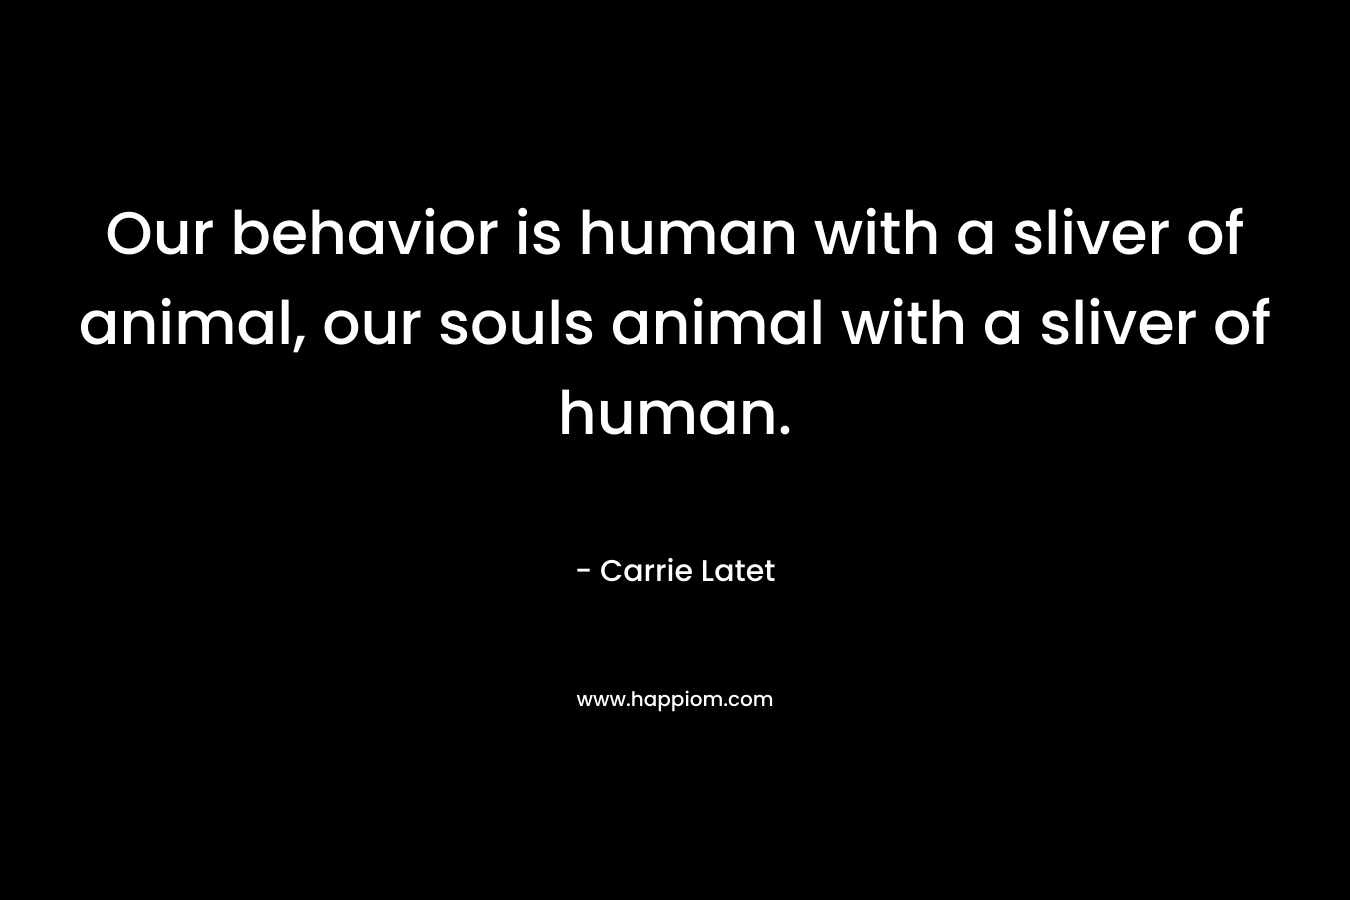 Our behavior is human with a sliver of animal, our souls animal with a sliver of human.